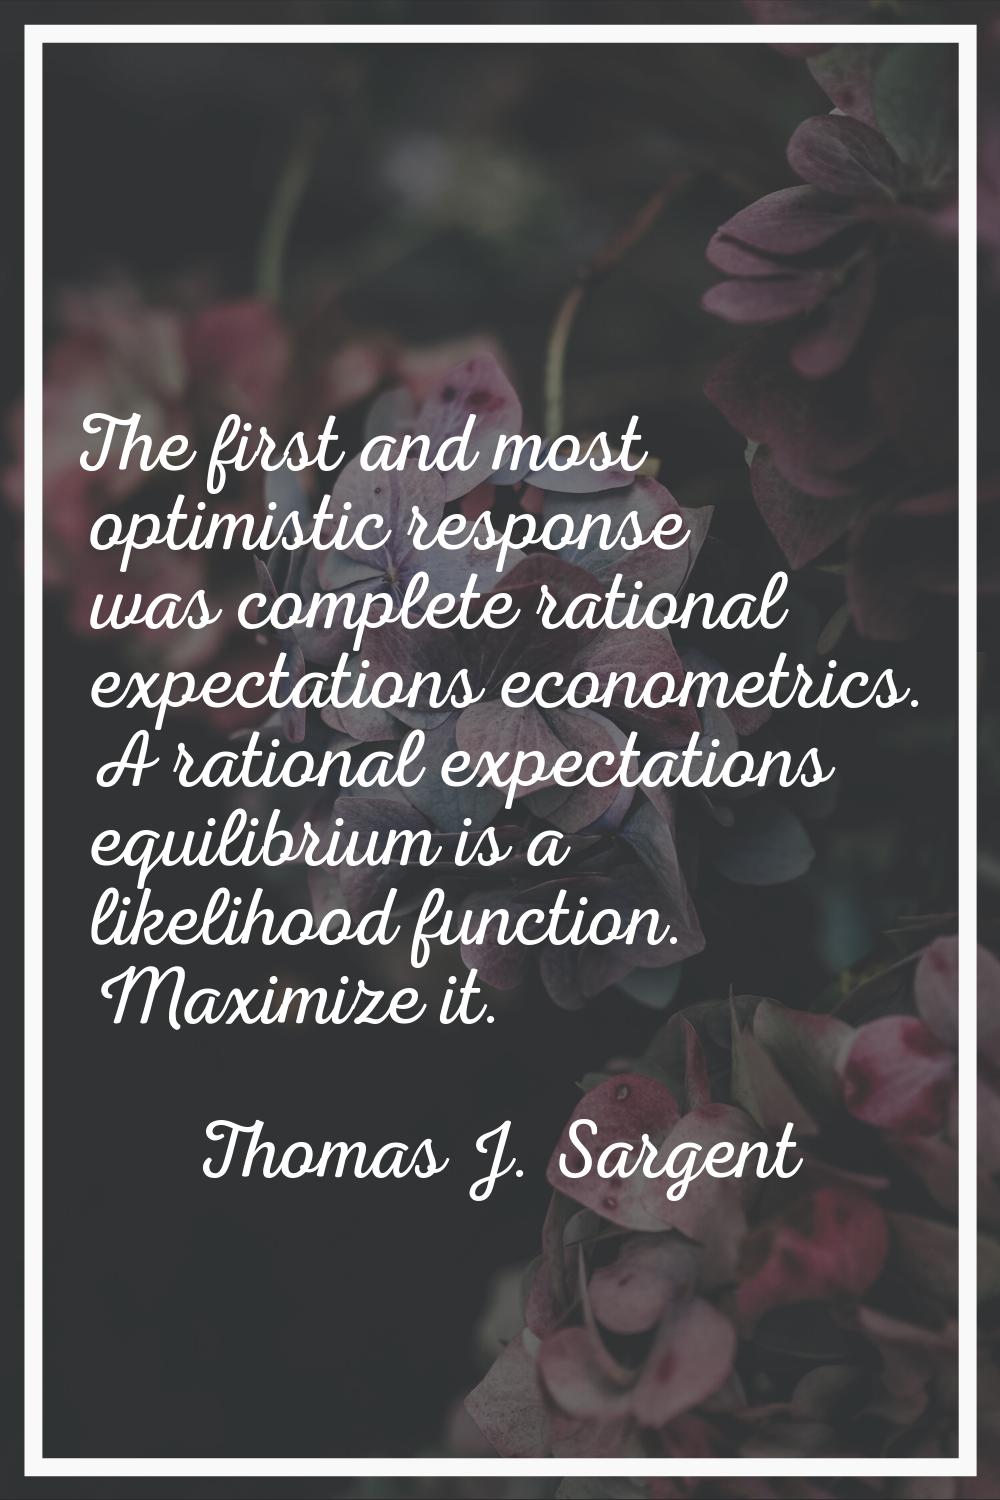 The first and most optimistic response was complete rational expectations econometrics. A rational 